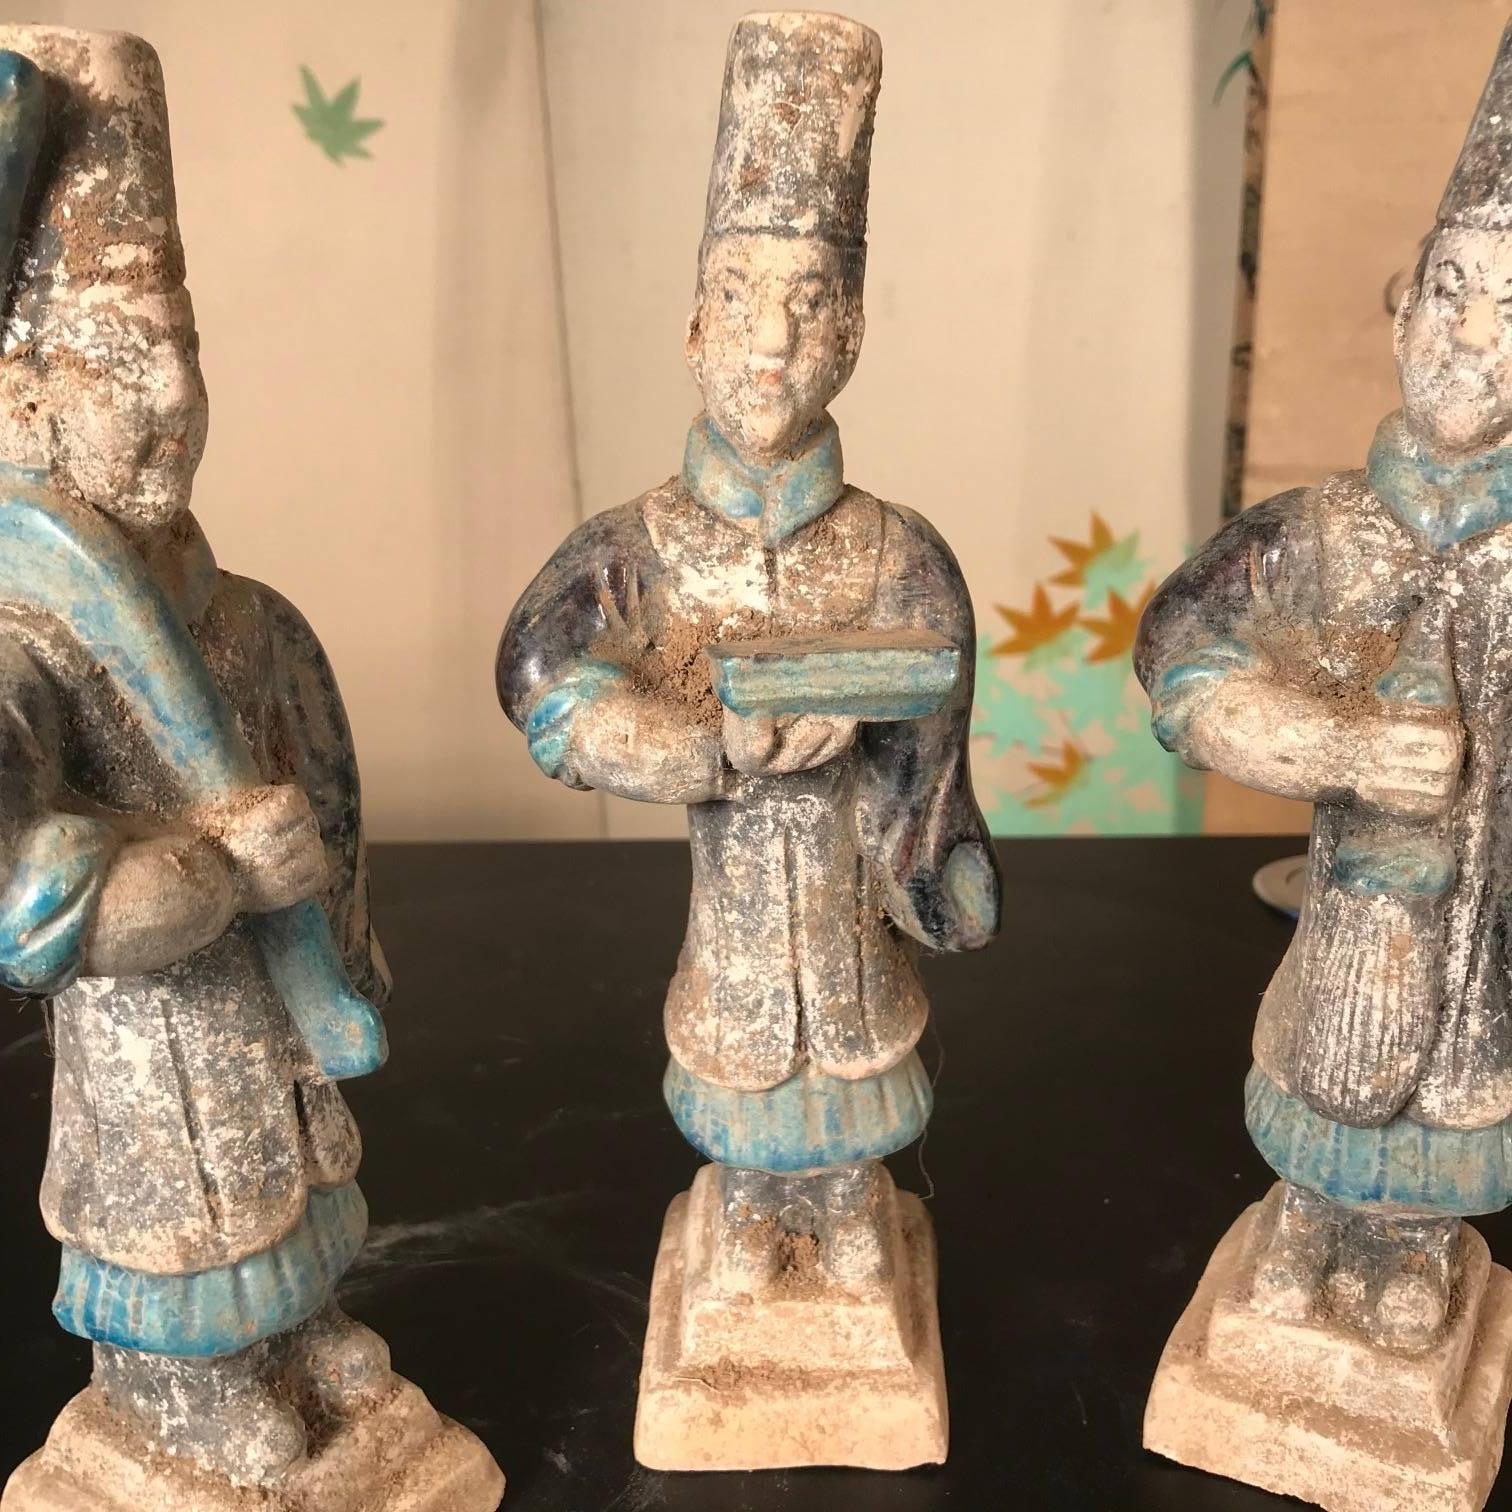 Ceramic Important Ancient Chinese Figural Group Three GARDENERS, Ming Dynasty, 1368-1644